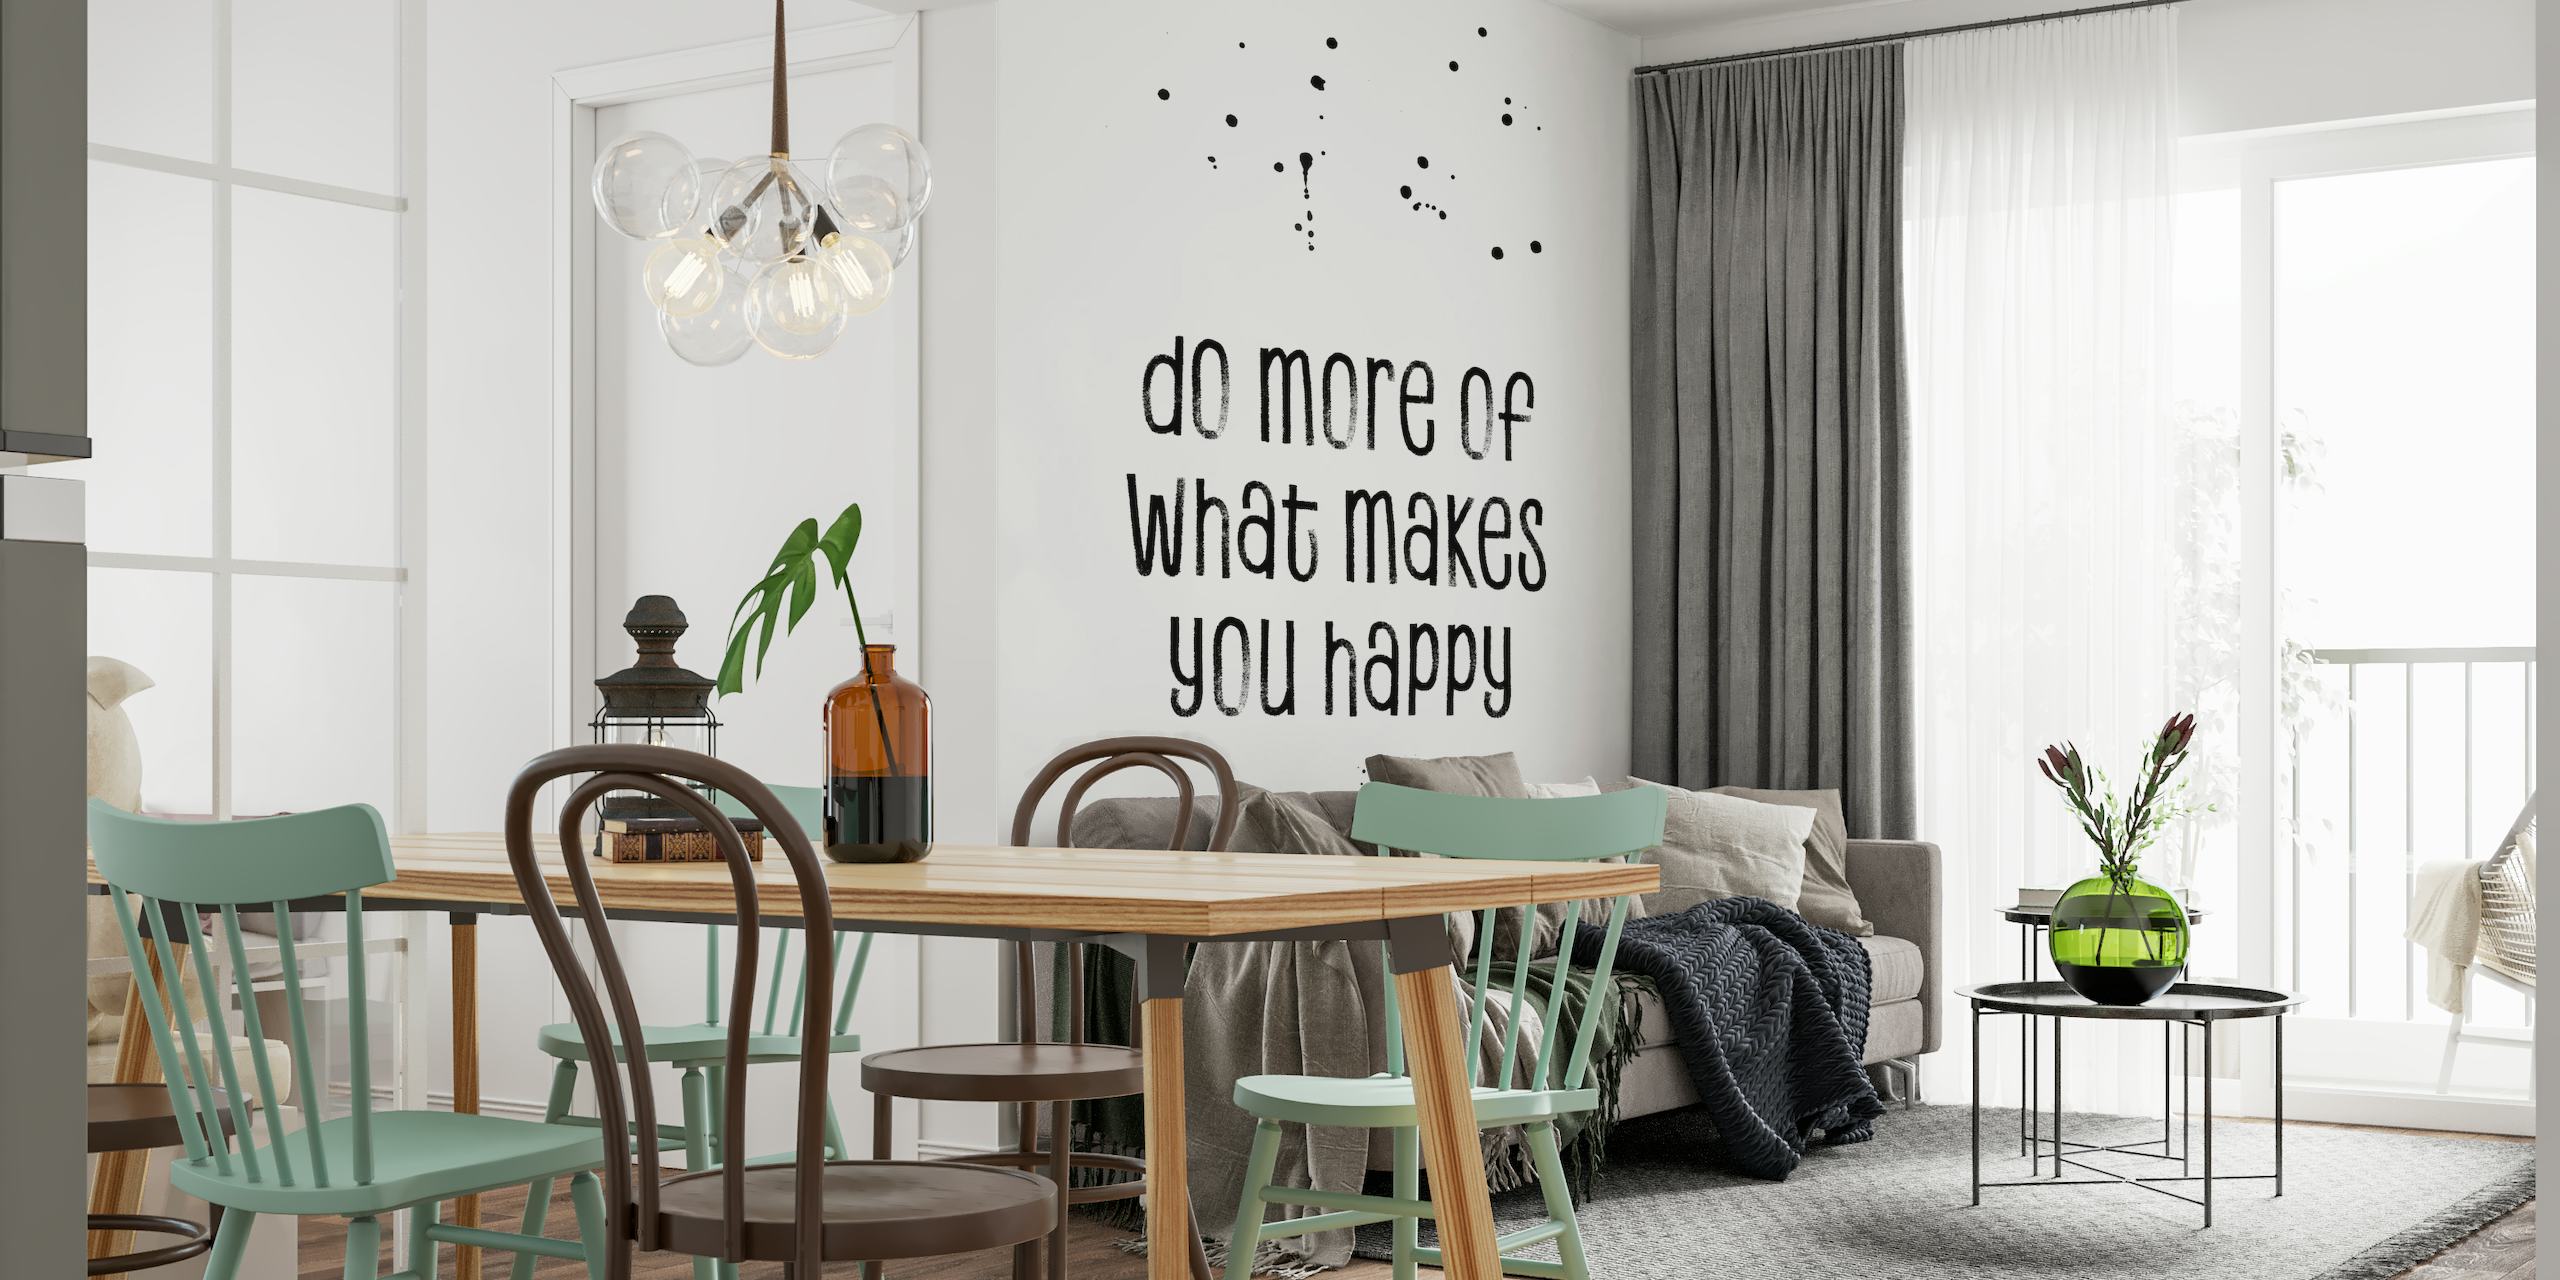 What makes you happy wallpaper